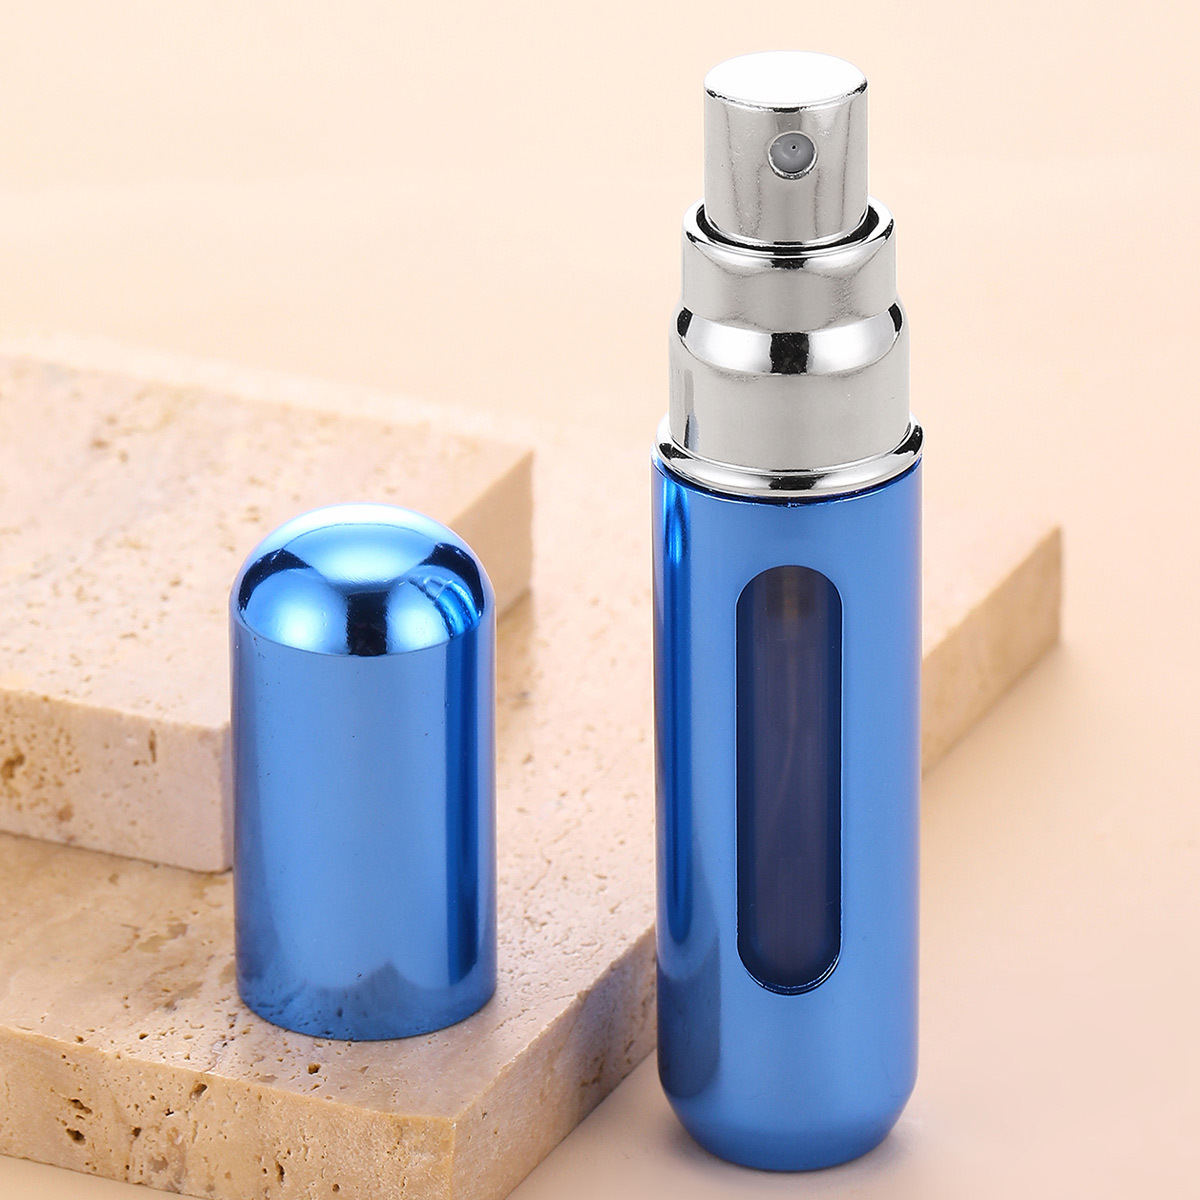 Portable Mini Refillable Perfume Atomizer Bottle Spray, Scent Pump Case for  Travel 4 Pcs Pack of 5ml